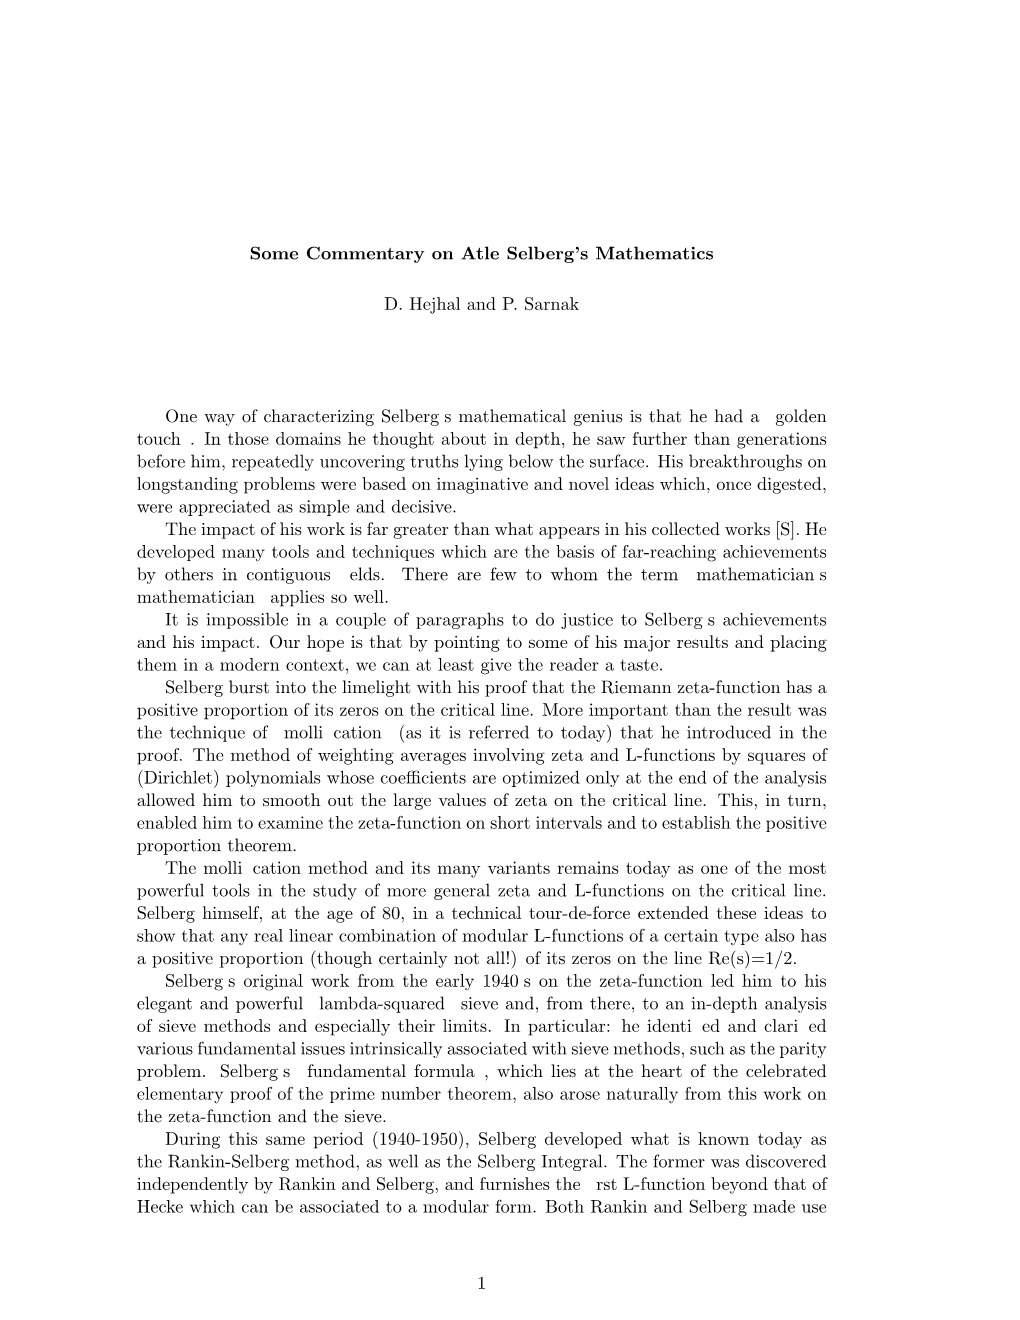 "Some Commentary on Atle Selberg's Mathematics"(With D.Hejhal)